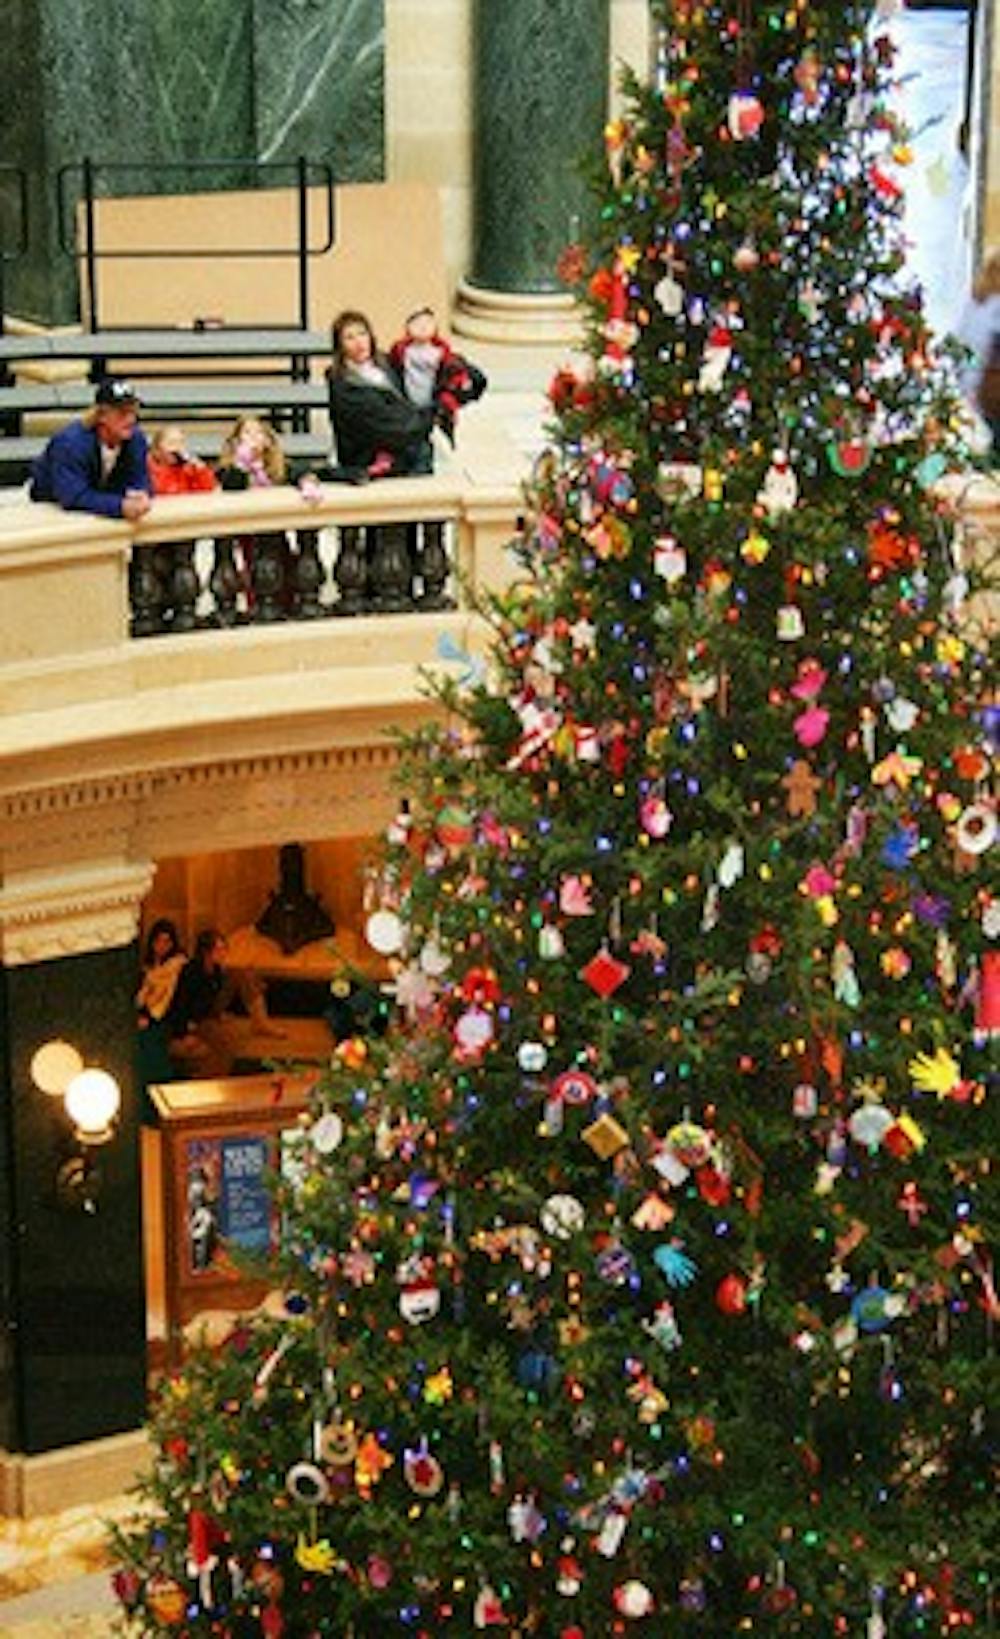 Christmas tree resolution a waste of Capitol's time